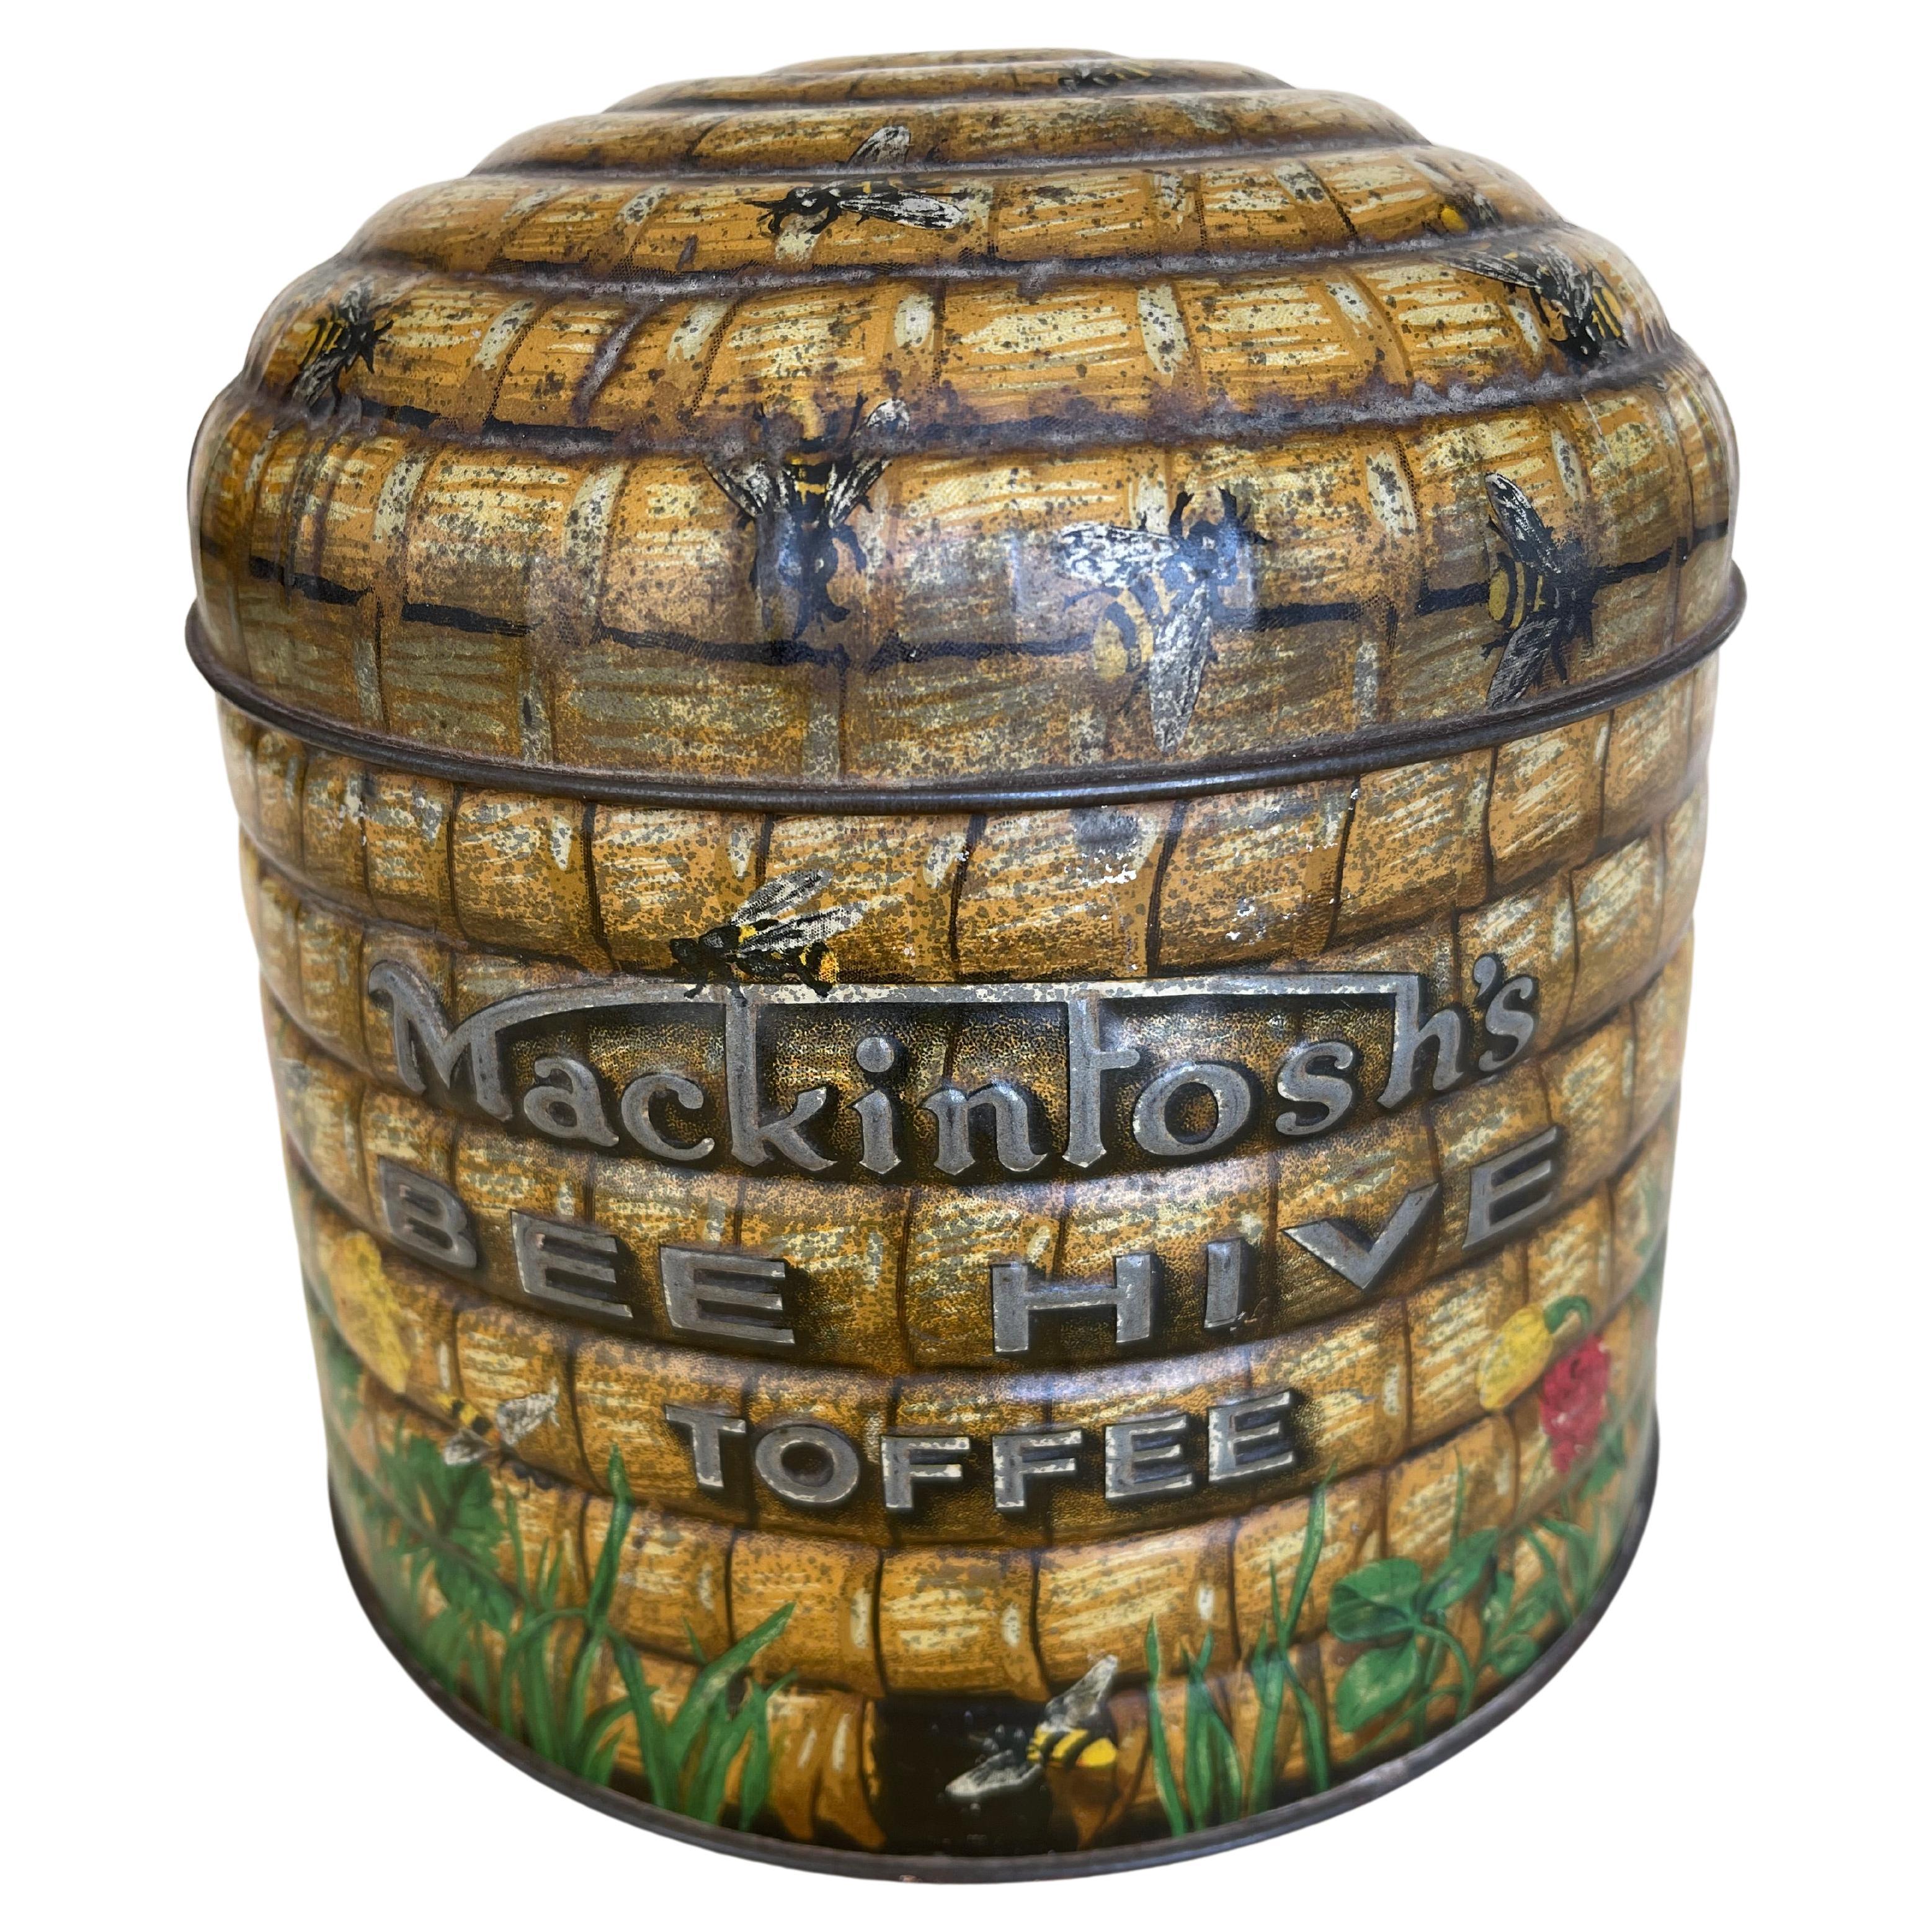 Lithographed Tin Canister, Mackintosh Bee Hive Toffee, English ca. 1920's